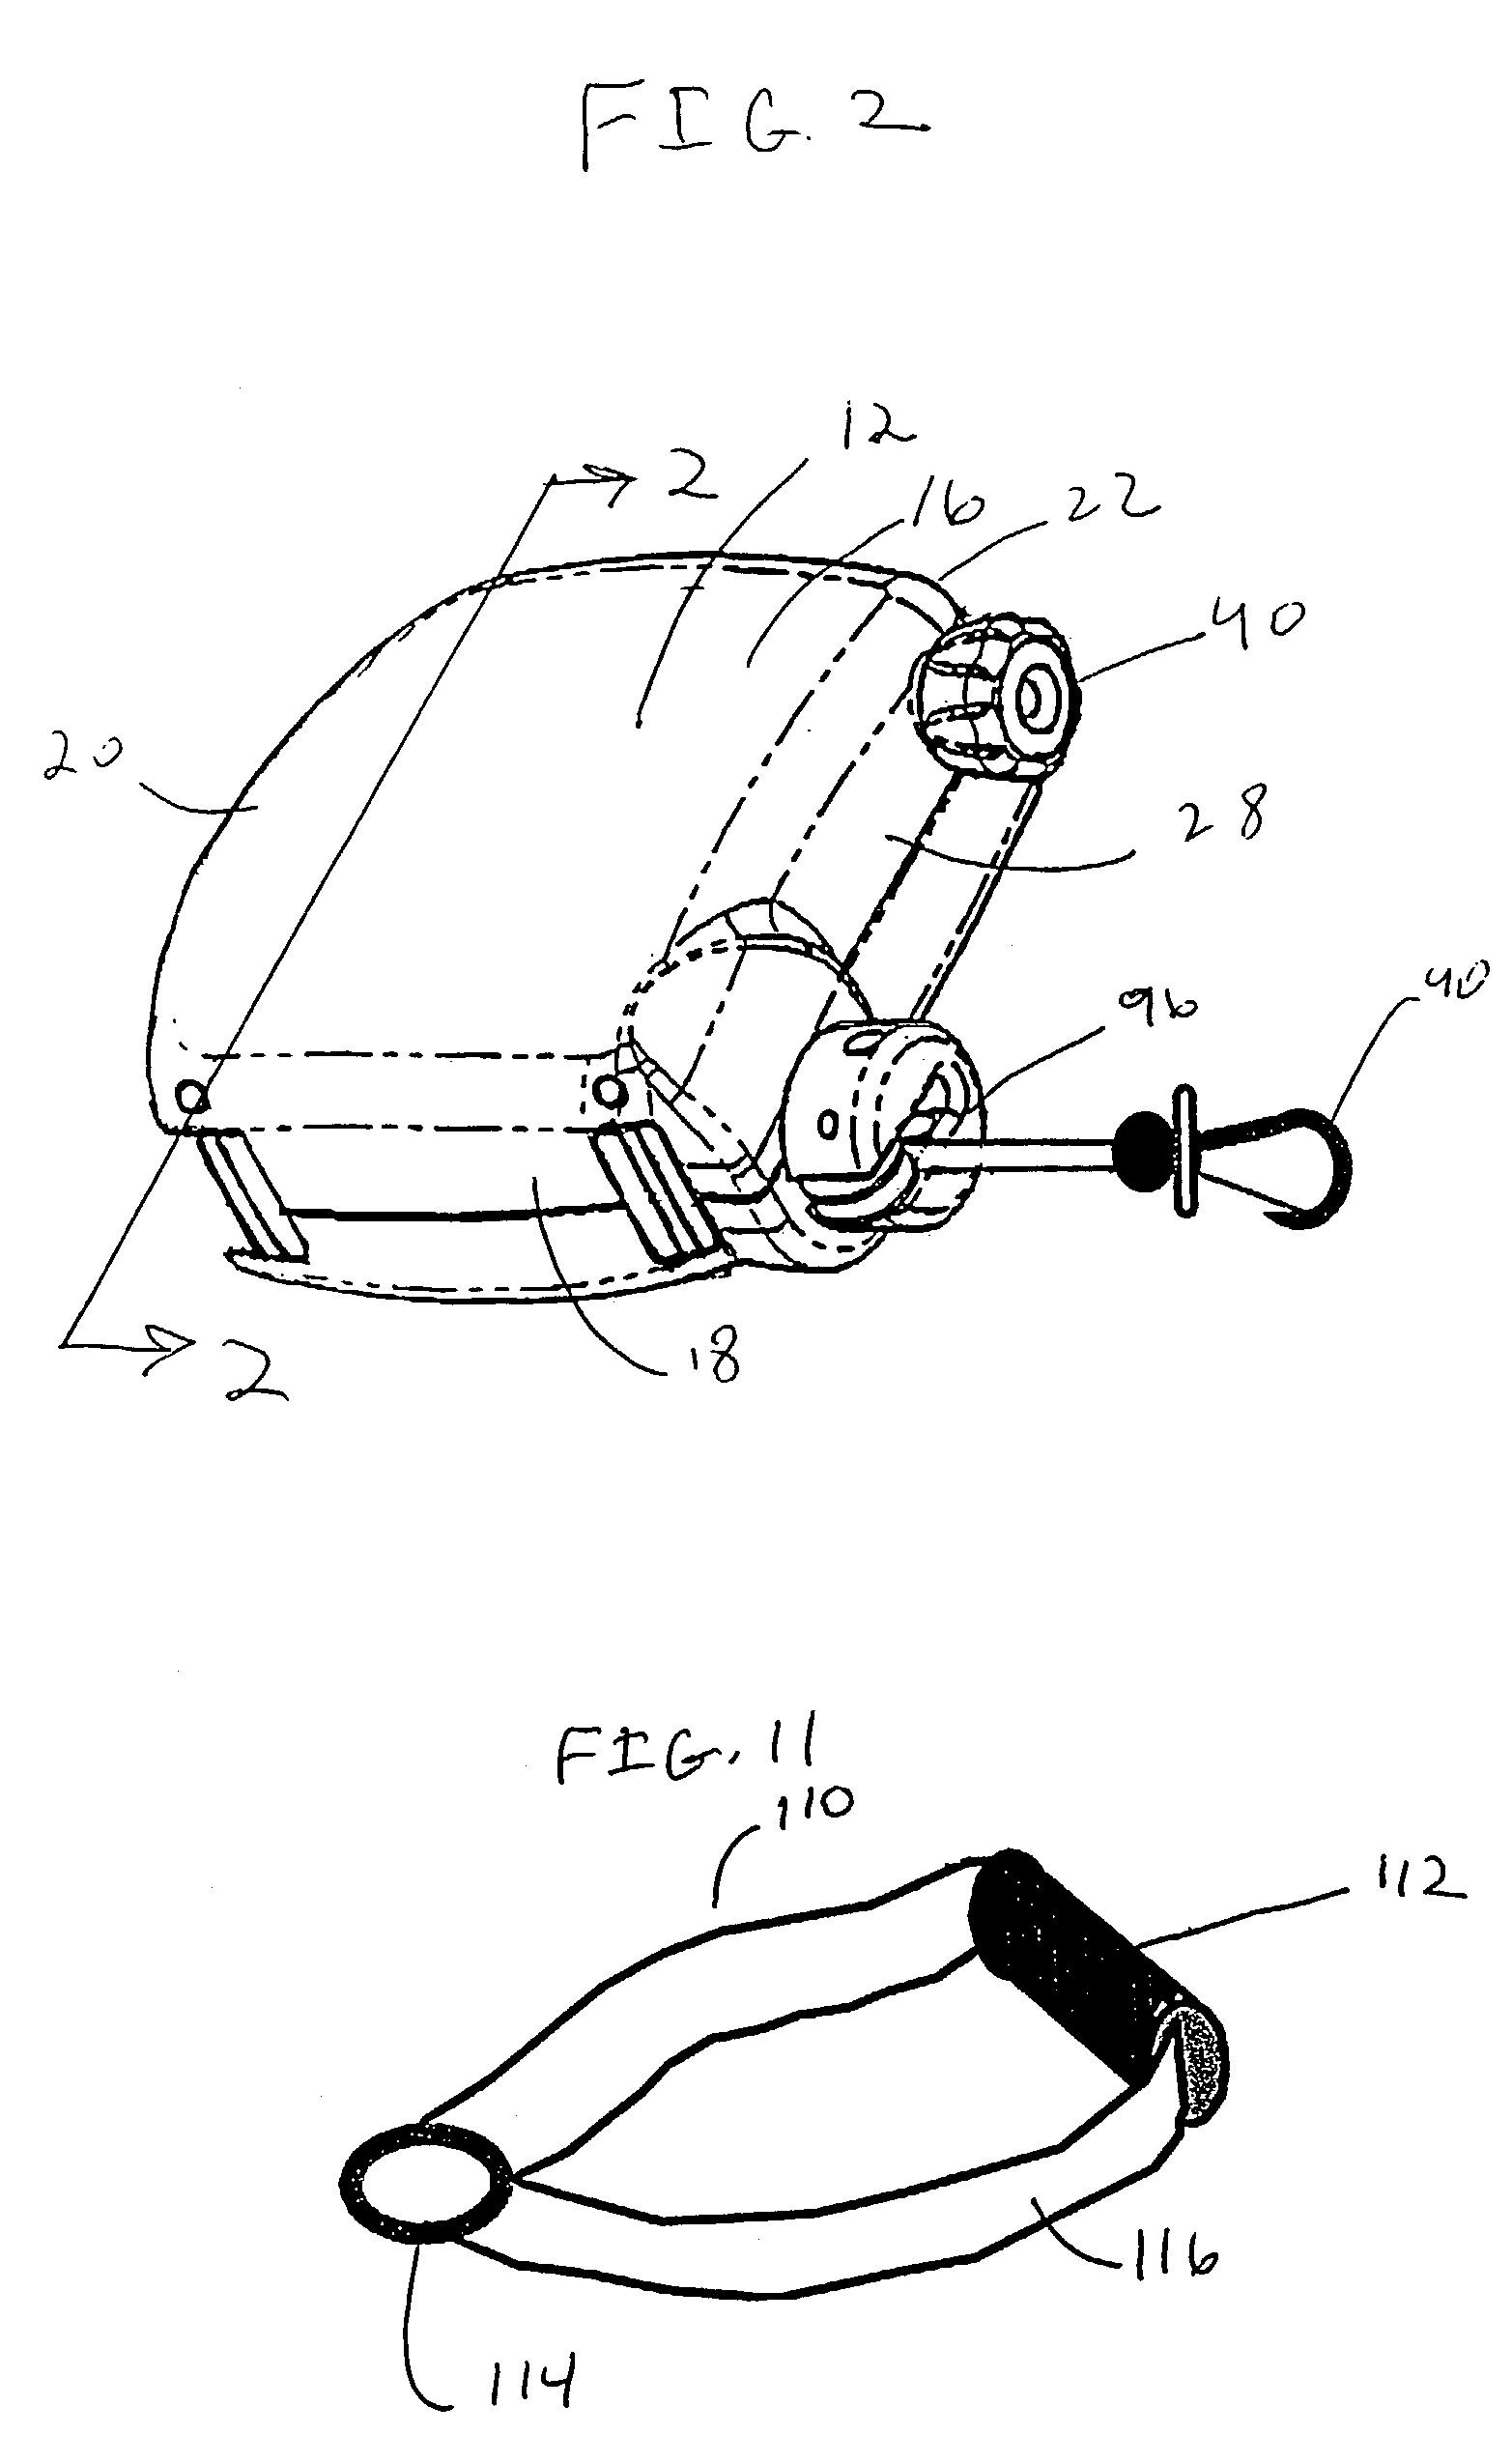 Portable handheld exercise apparatus which can be attached to a multiplicity of body parts